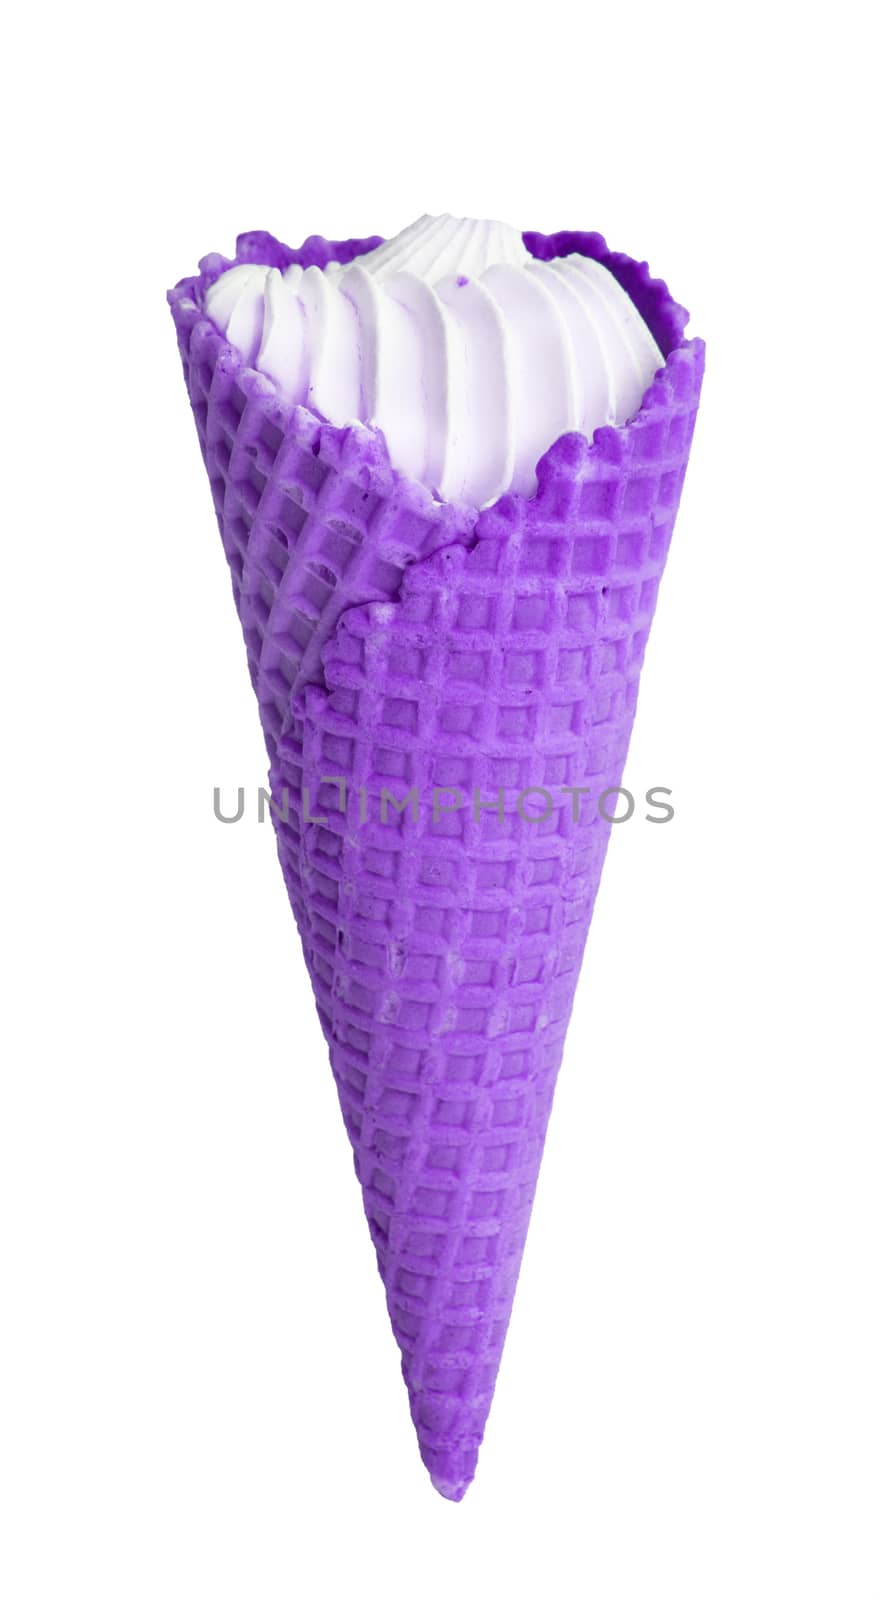 Purple waffle ice cream cone isolated on white background, vertical.